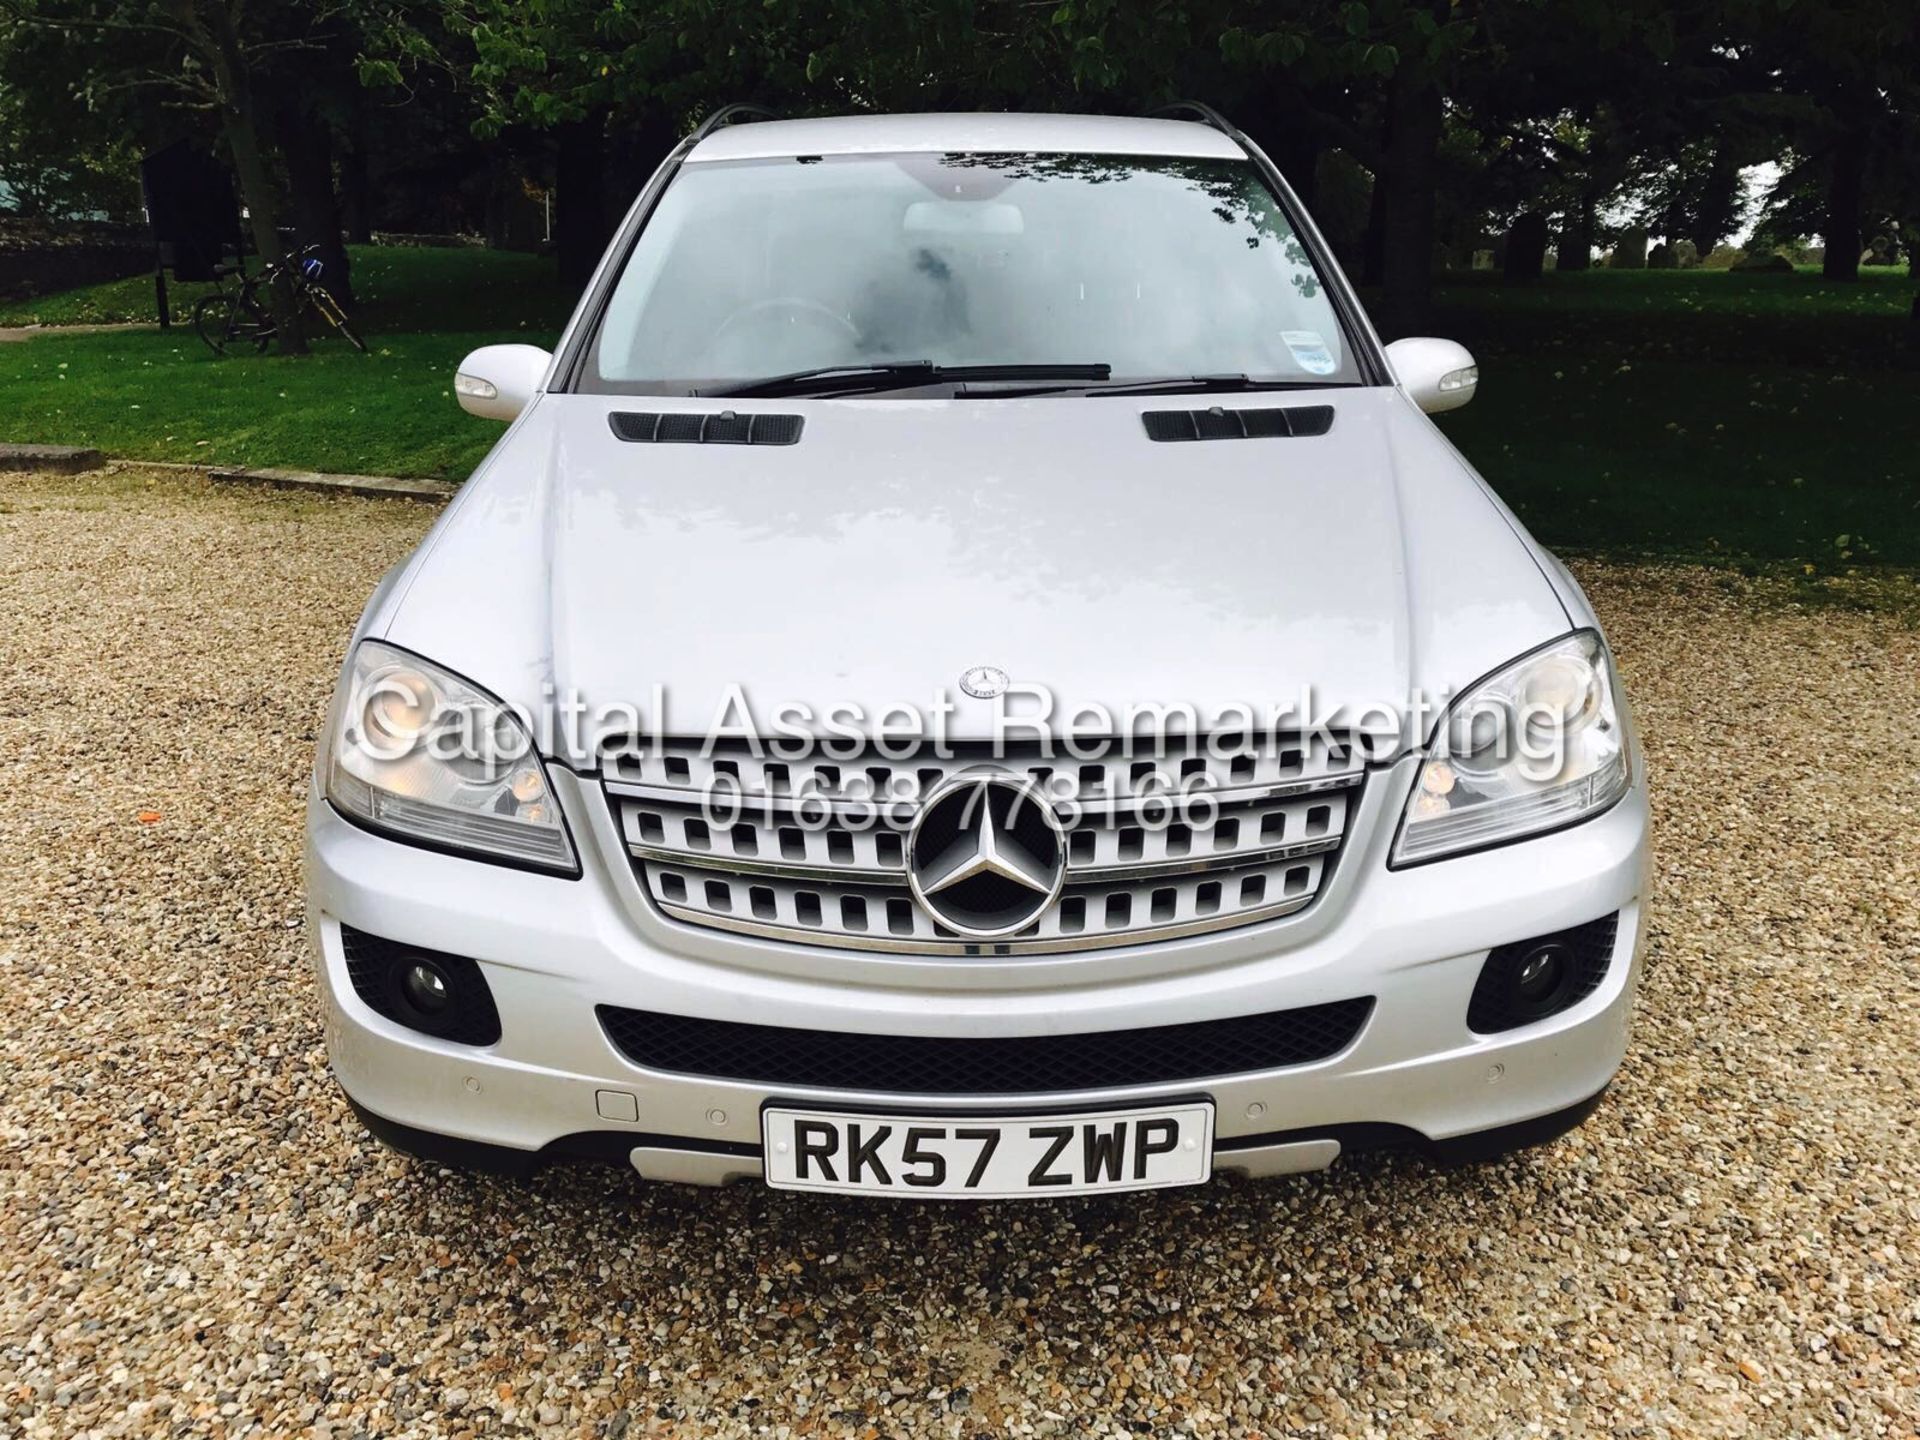 MERCEDES ML280CDI "EDITION S" AUTO 4MATIC (2008MODEL) 1 PREVIOUS OWNER FSH (NO VAT TO PAY ON HAMMER) - Image 2 of 16